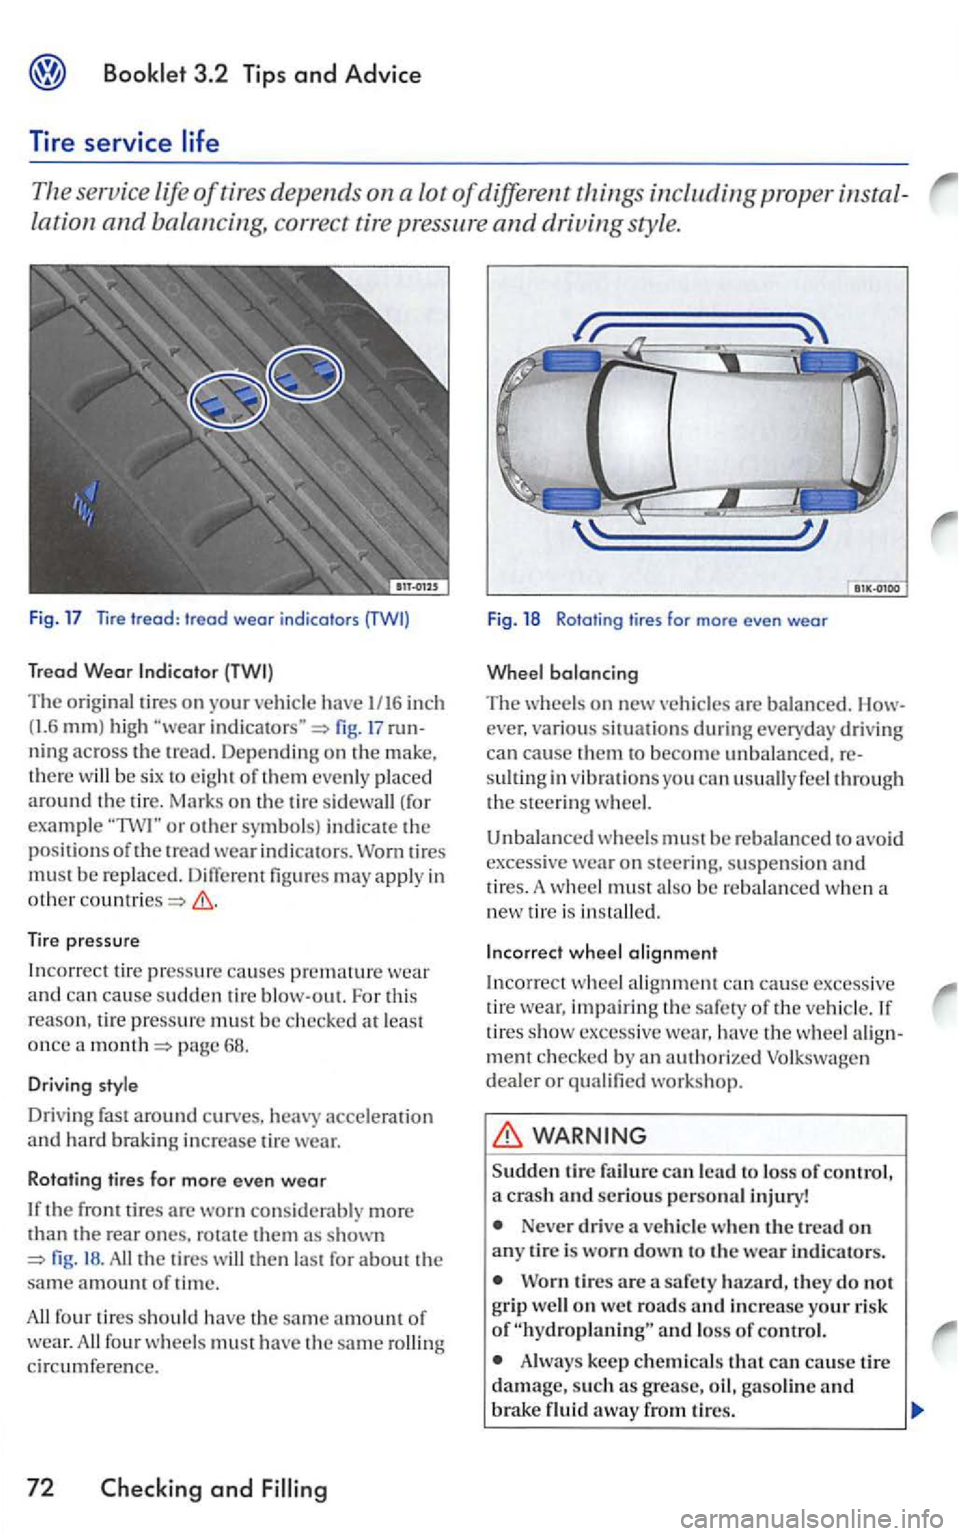 VOLKSWAGEN GOLF 2007  Owners Manual 3.2  Tip s  and Advice 
Tire  service 
The serv ice life of tires  depends on a  lot of different things including proper 
lation and balancing,  correct tire  pressure and driving  style. 
Fig. 17  T